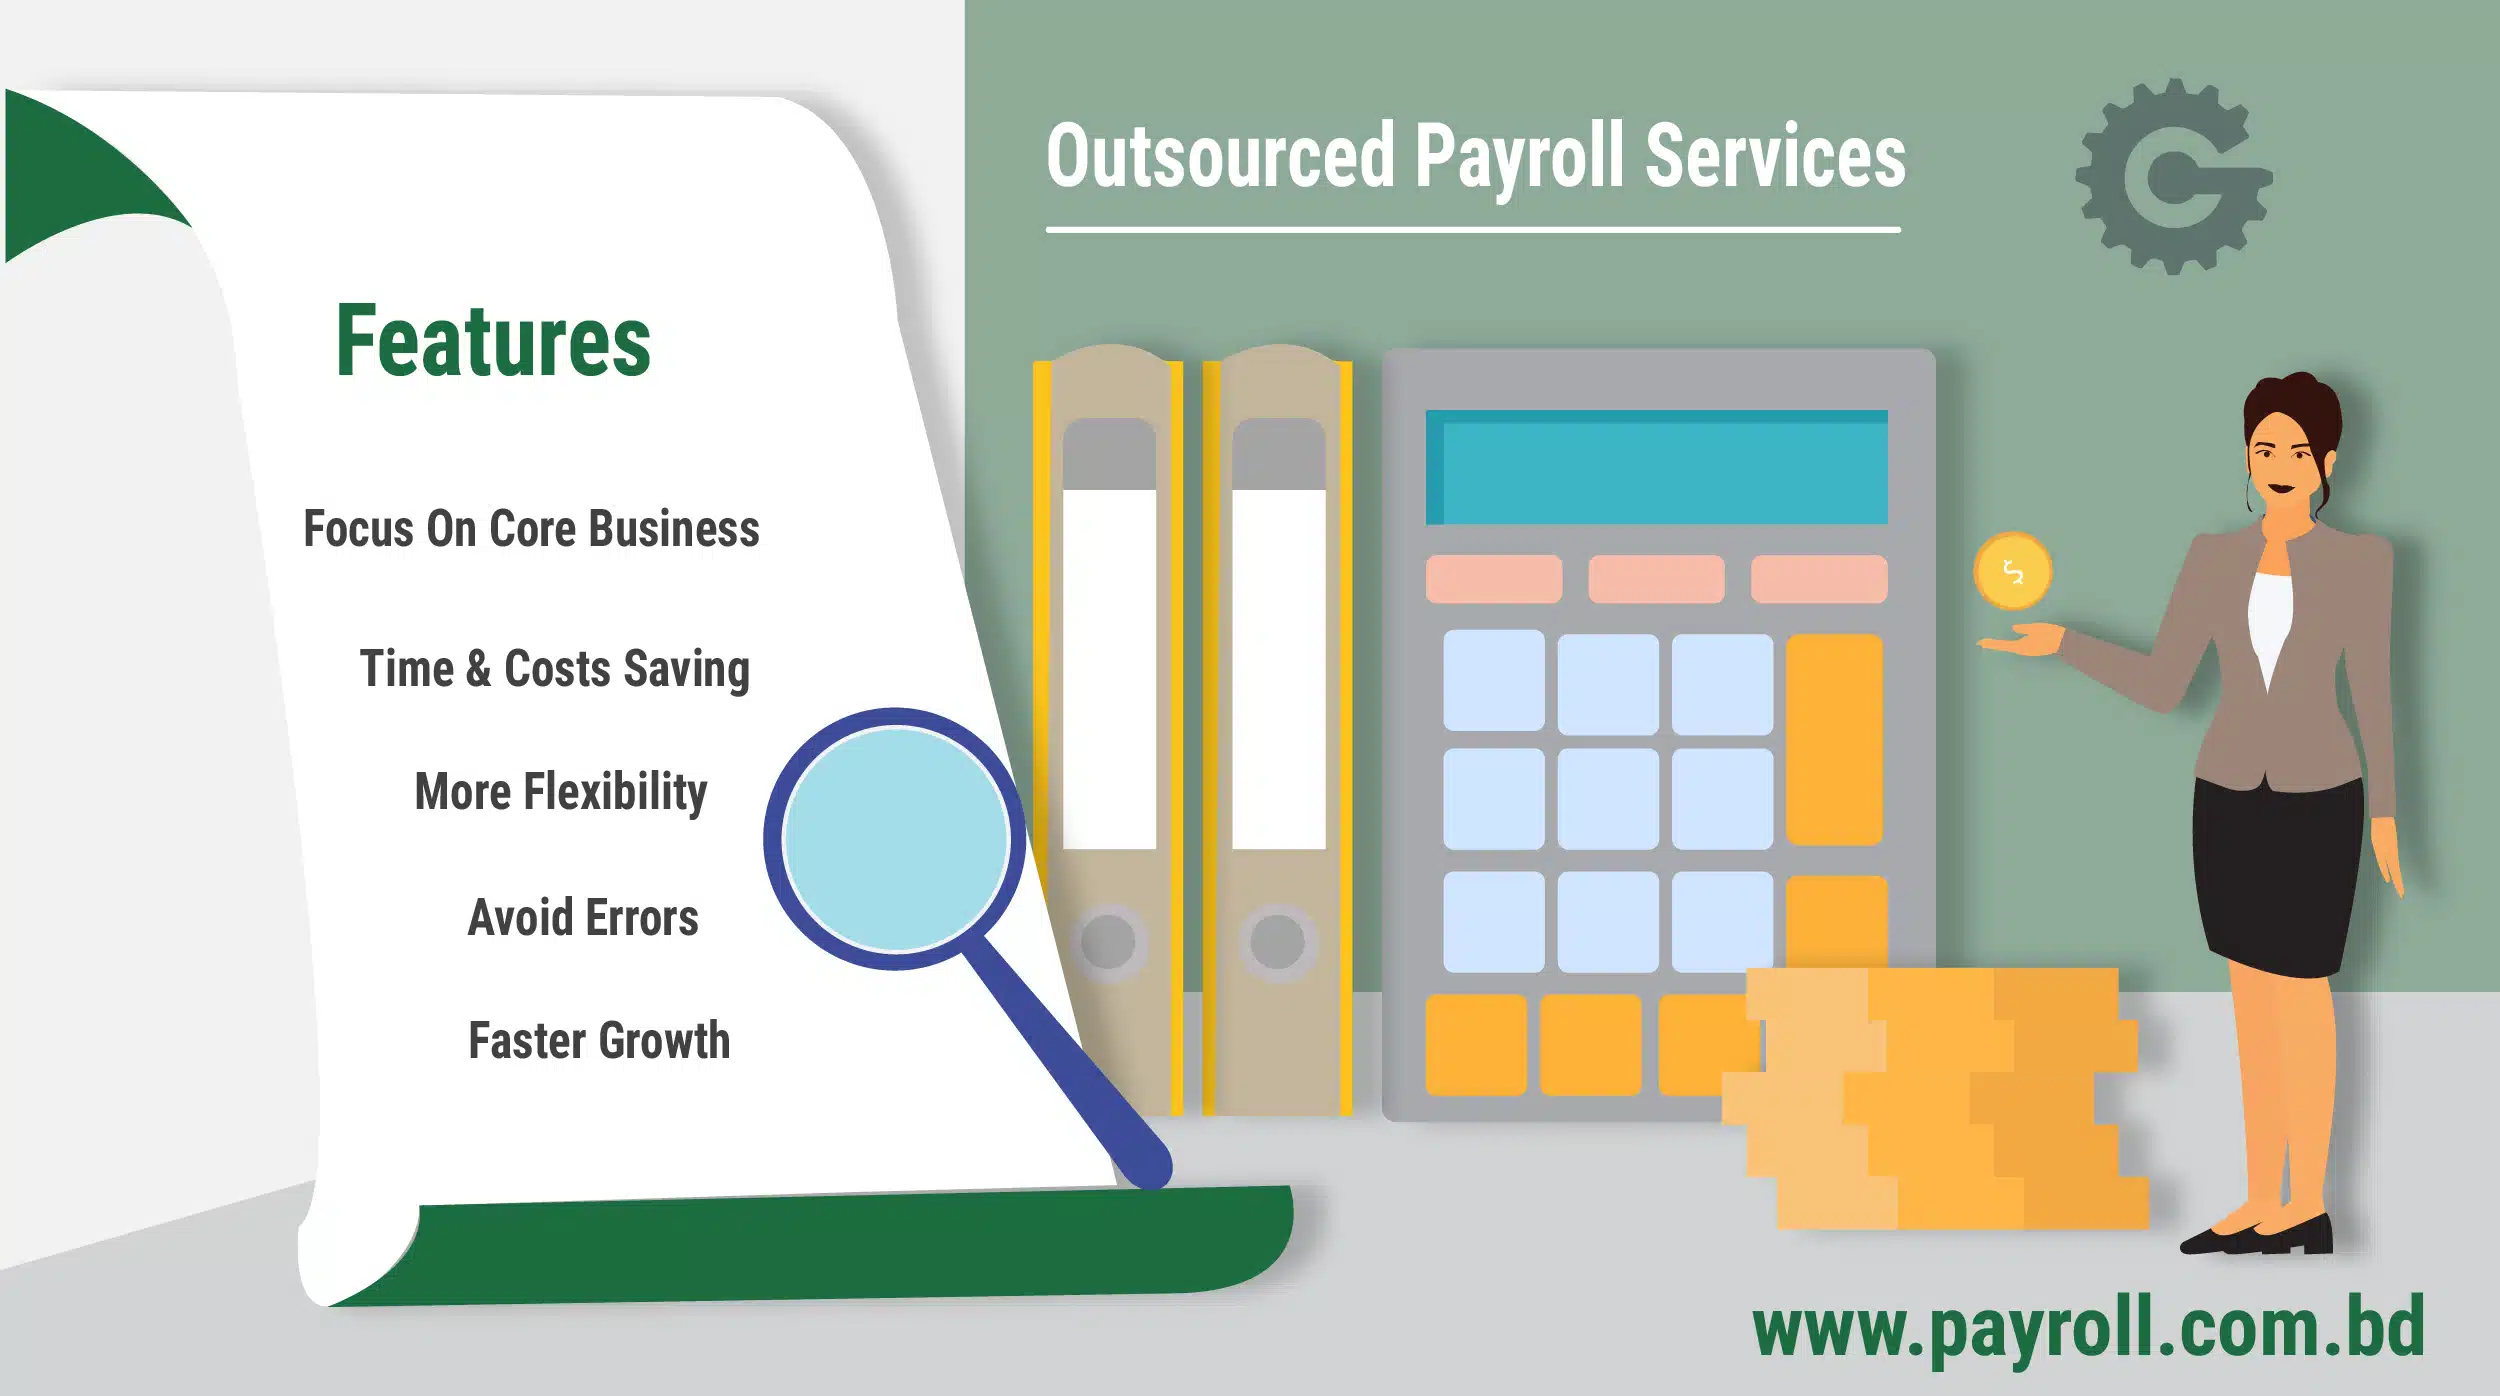 Payroll-Outsourced payroll services